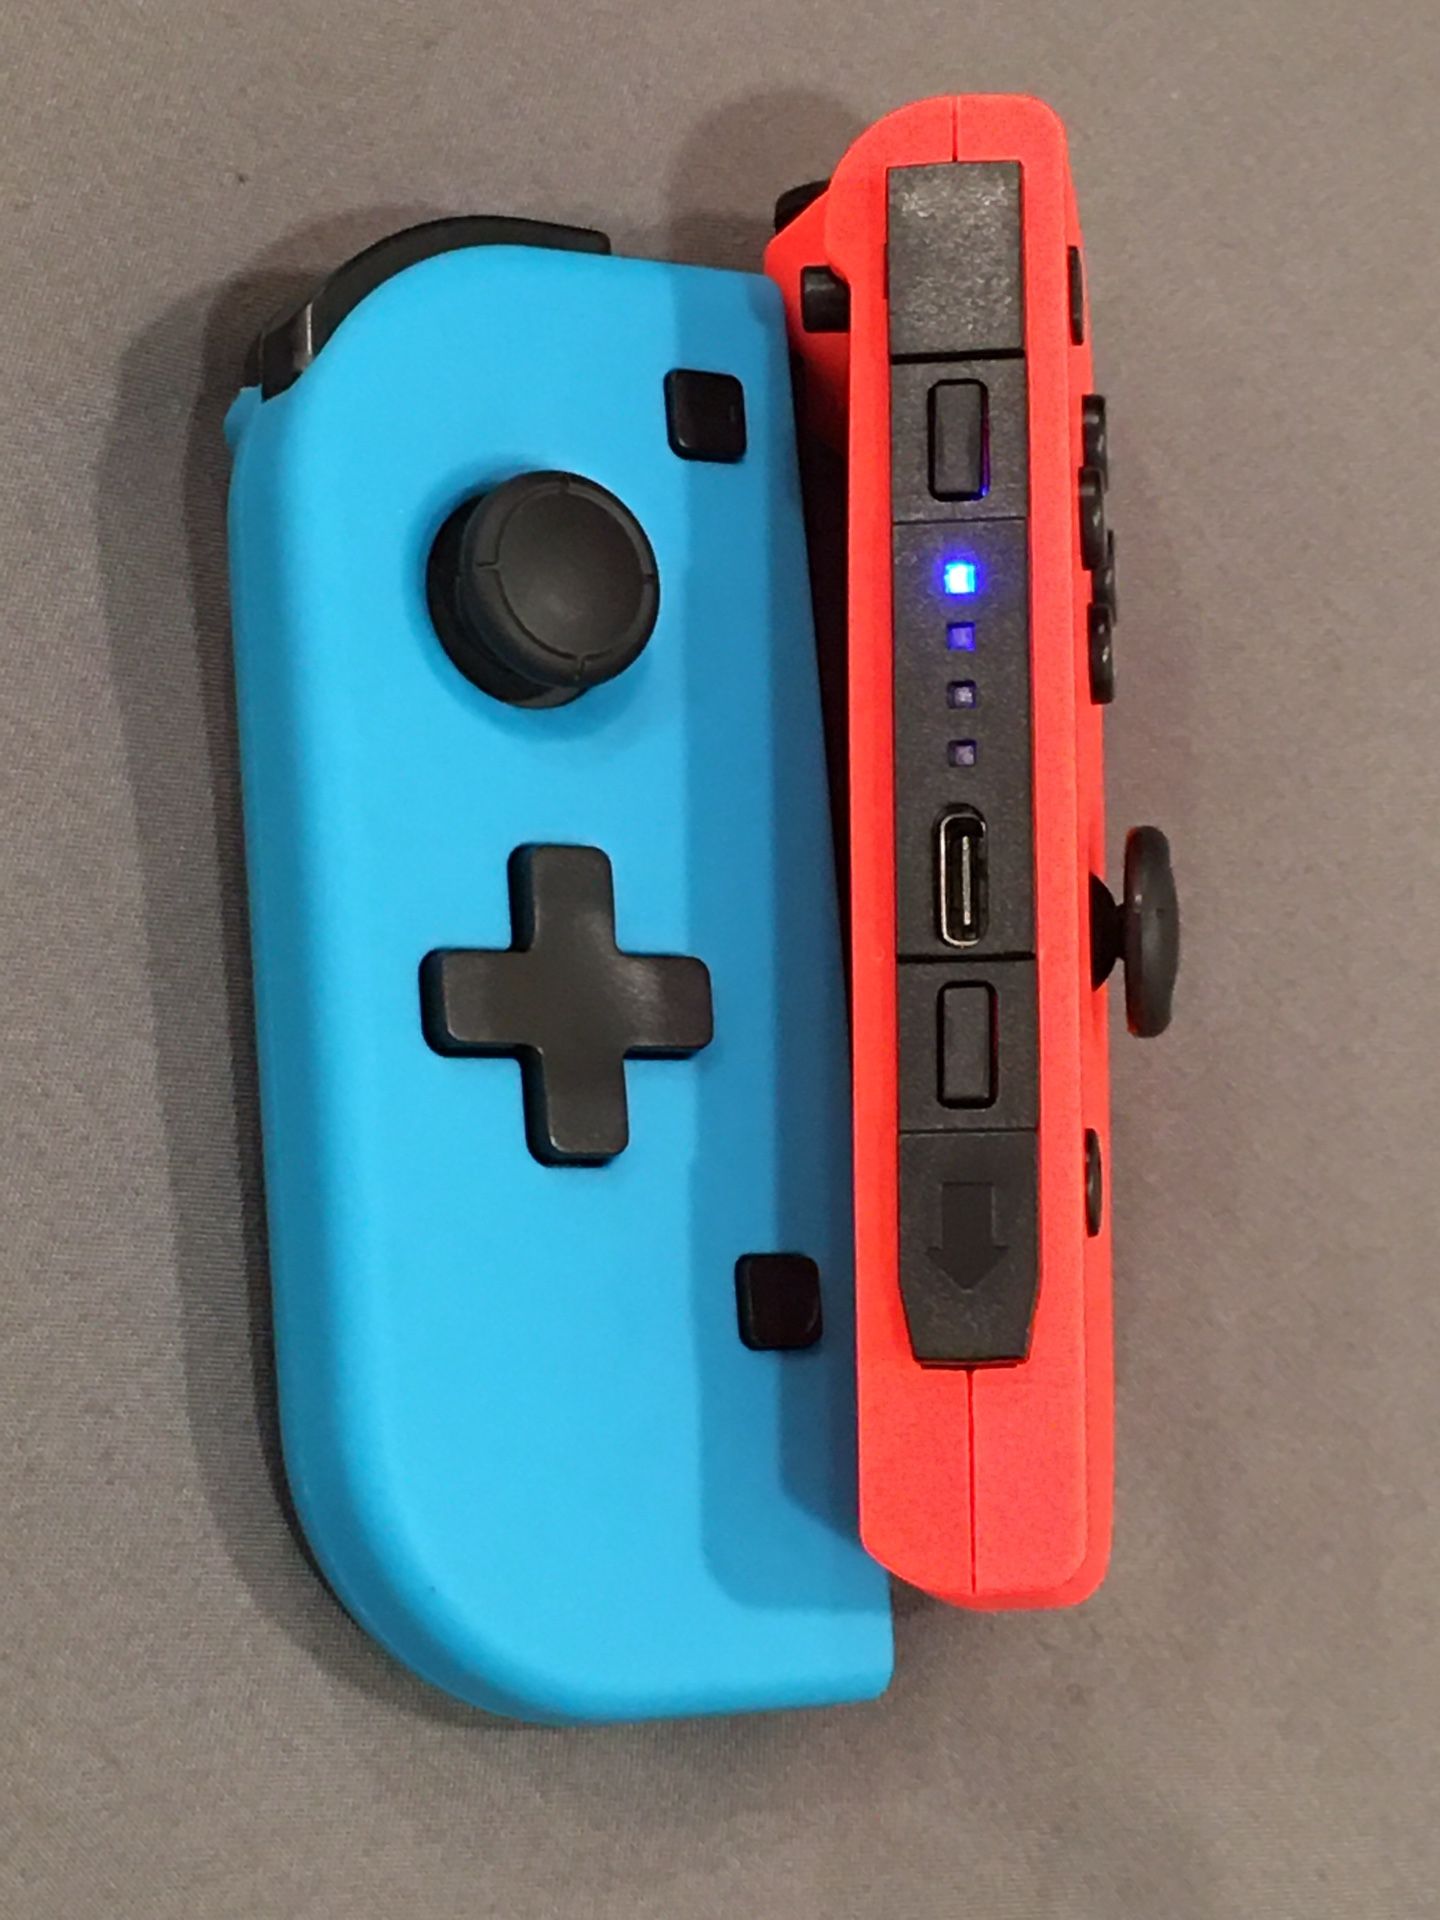 NYXI WIZARD Controller For Nintendo Switch Oled for Sale in New York, NY -  OfferUp